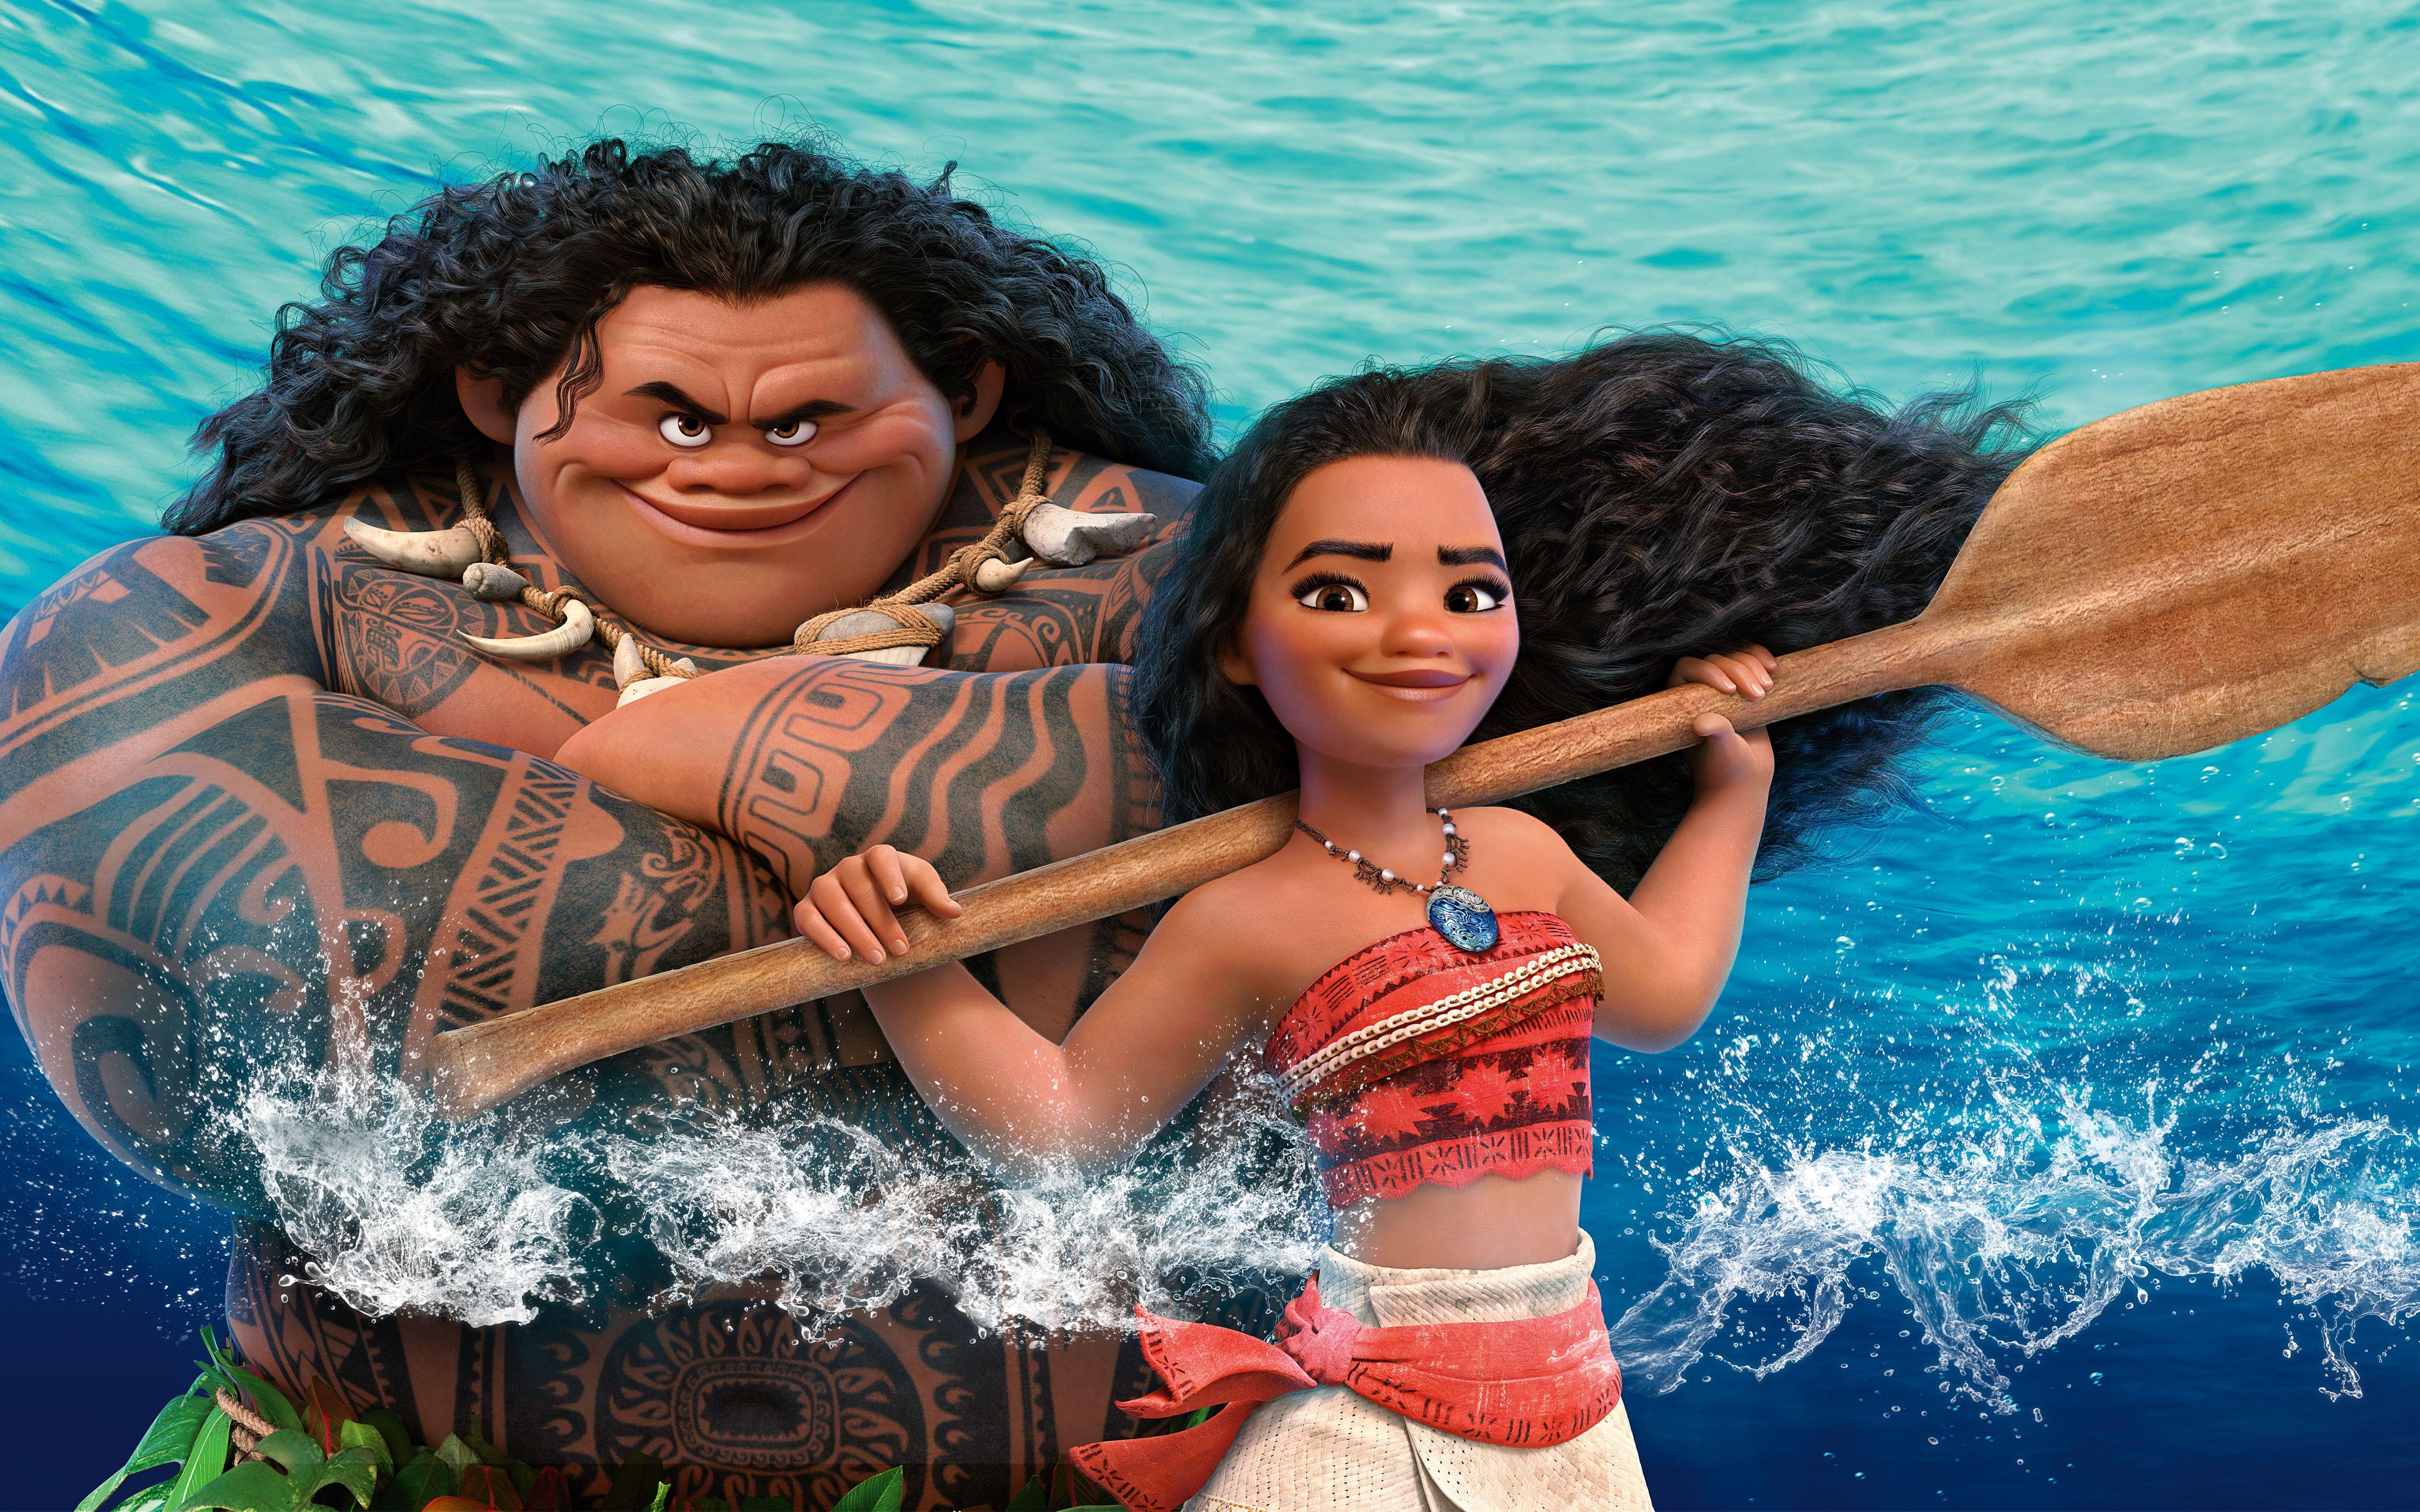  One day Ill know  8K Wallpaper Desktop  Smartphone HD link in  comments  rmoana